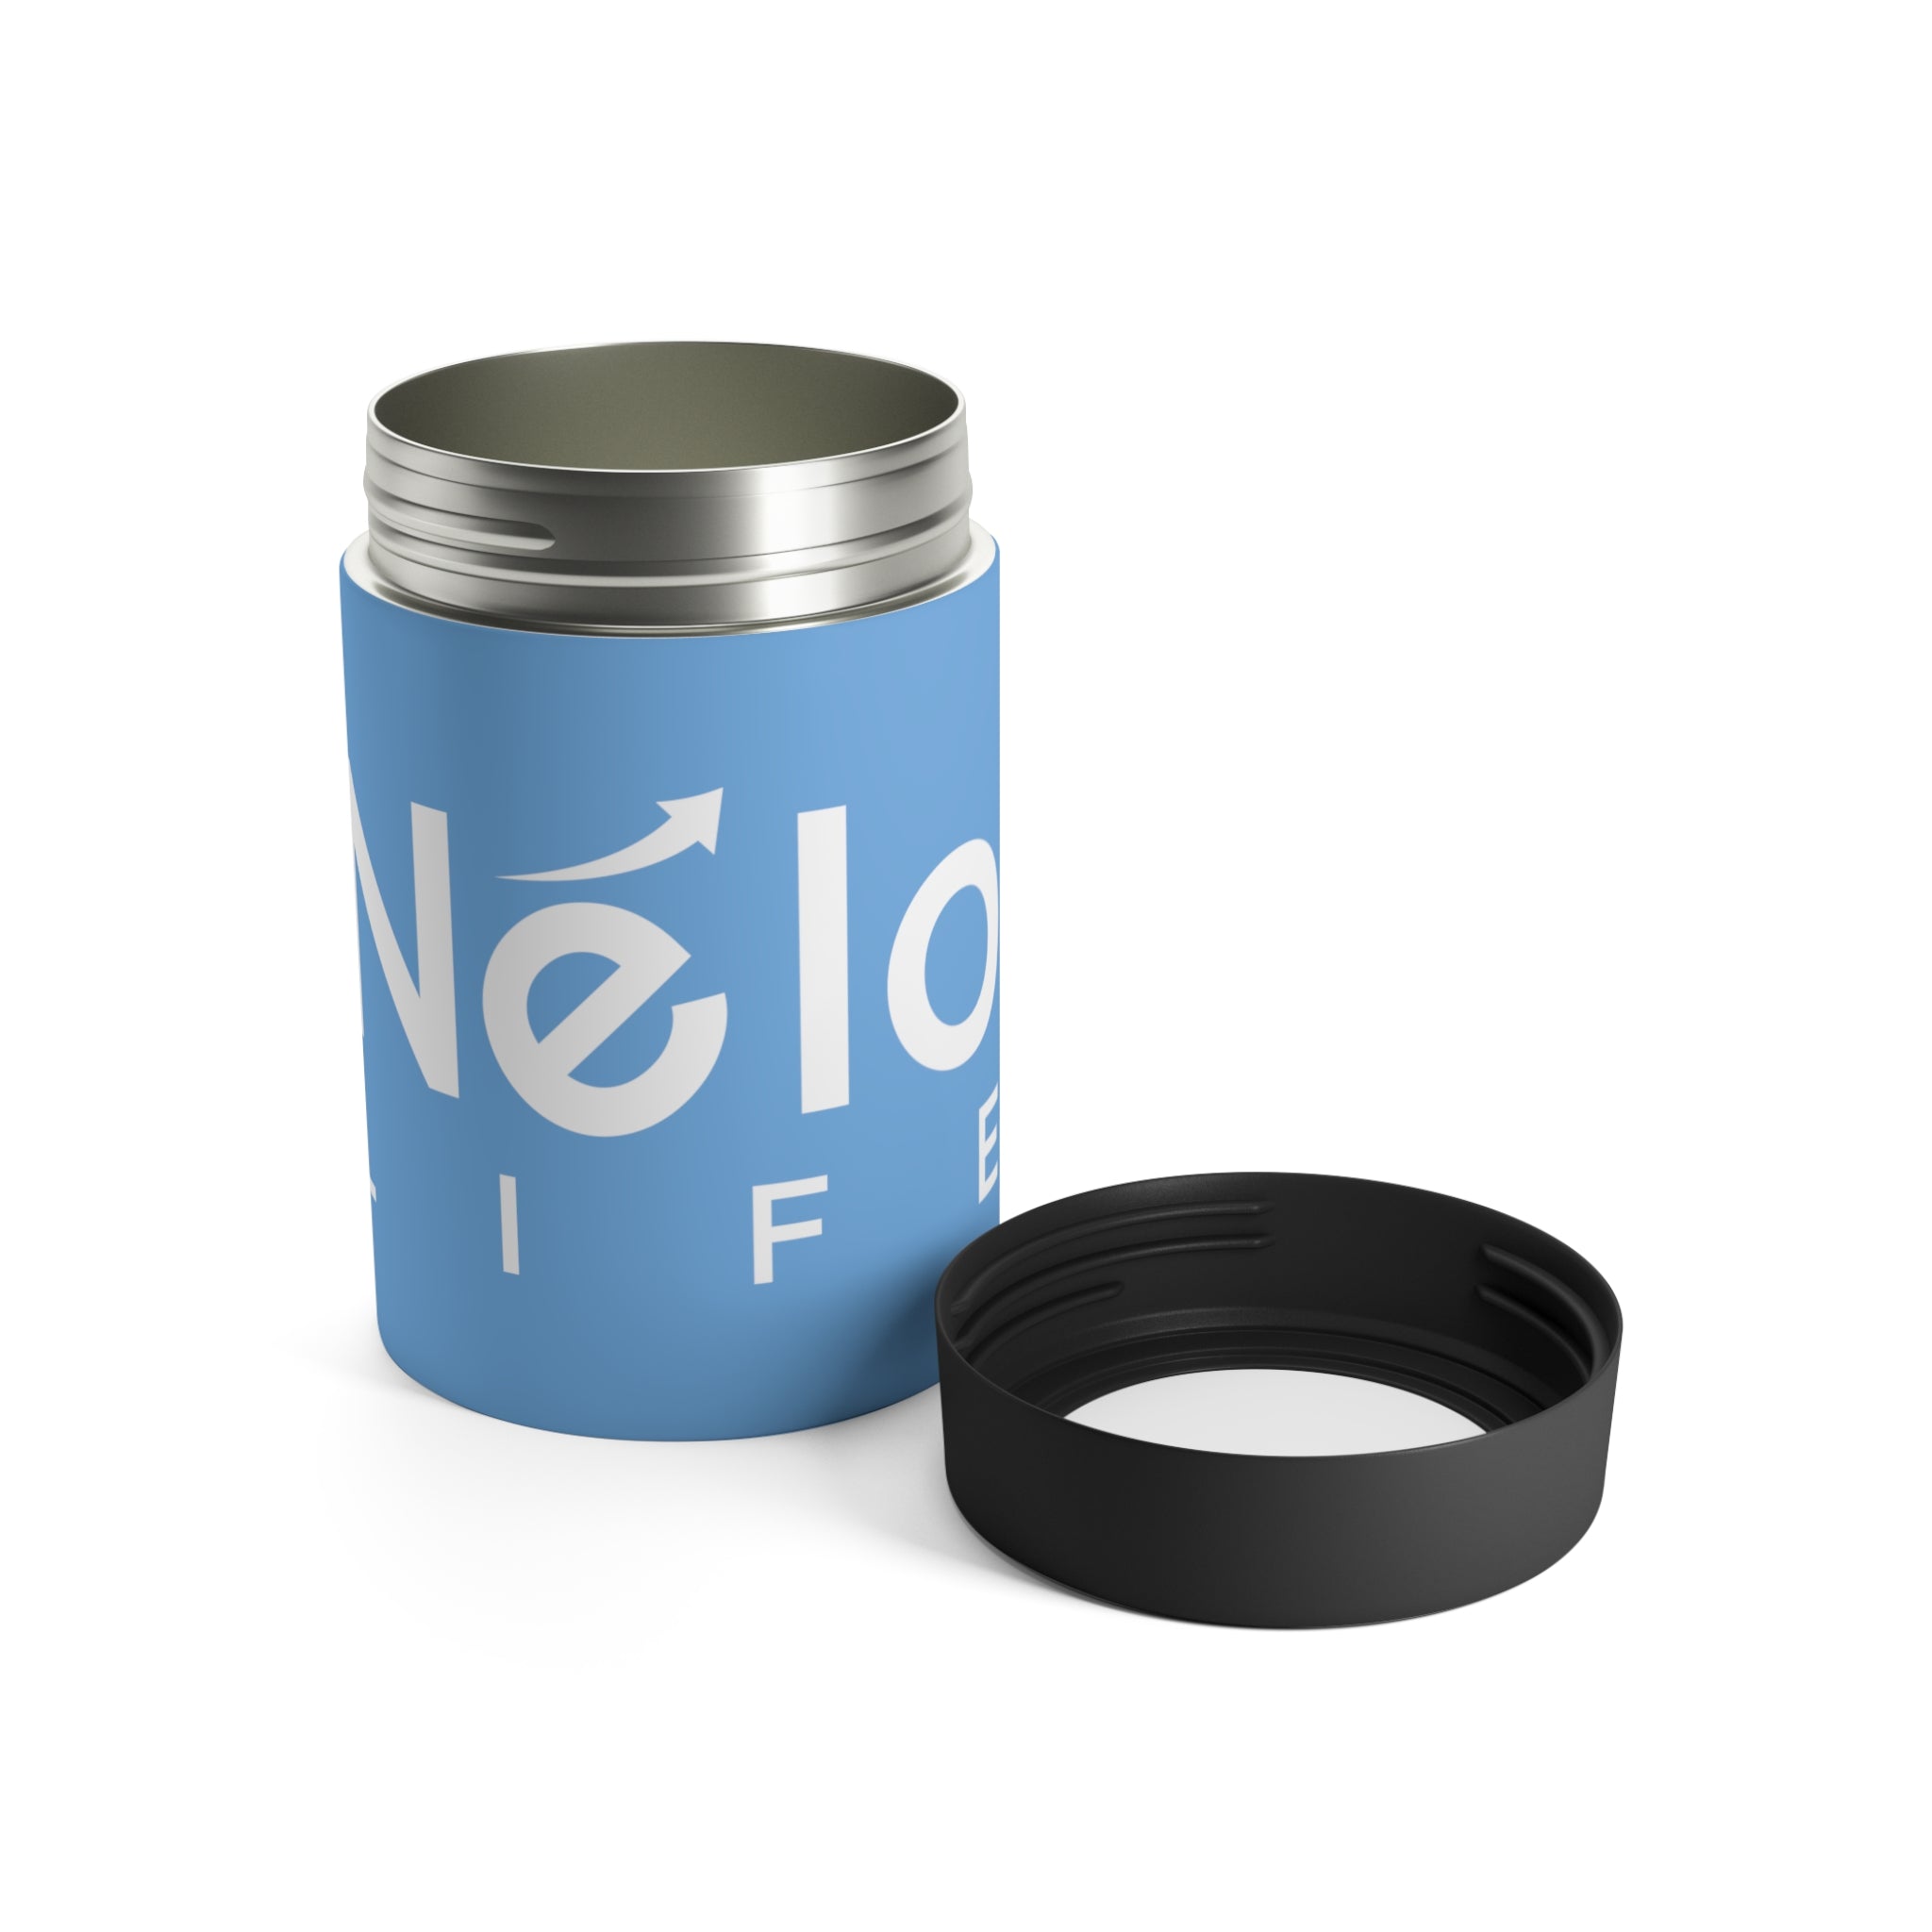 NELO LIFE Can Holder